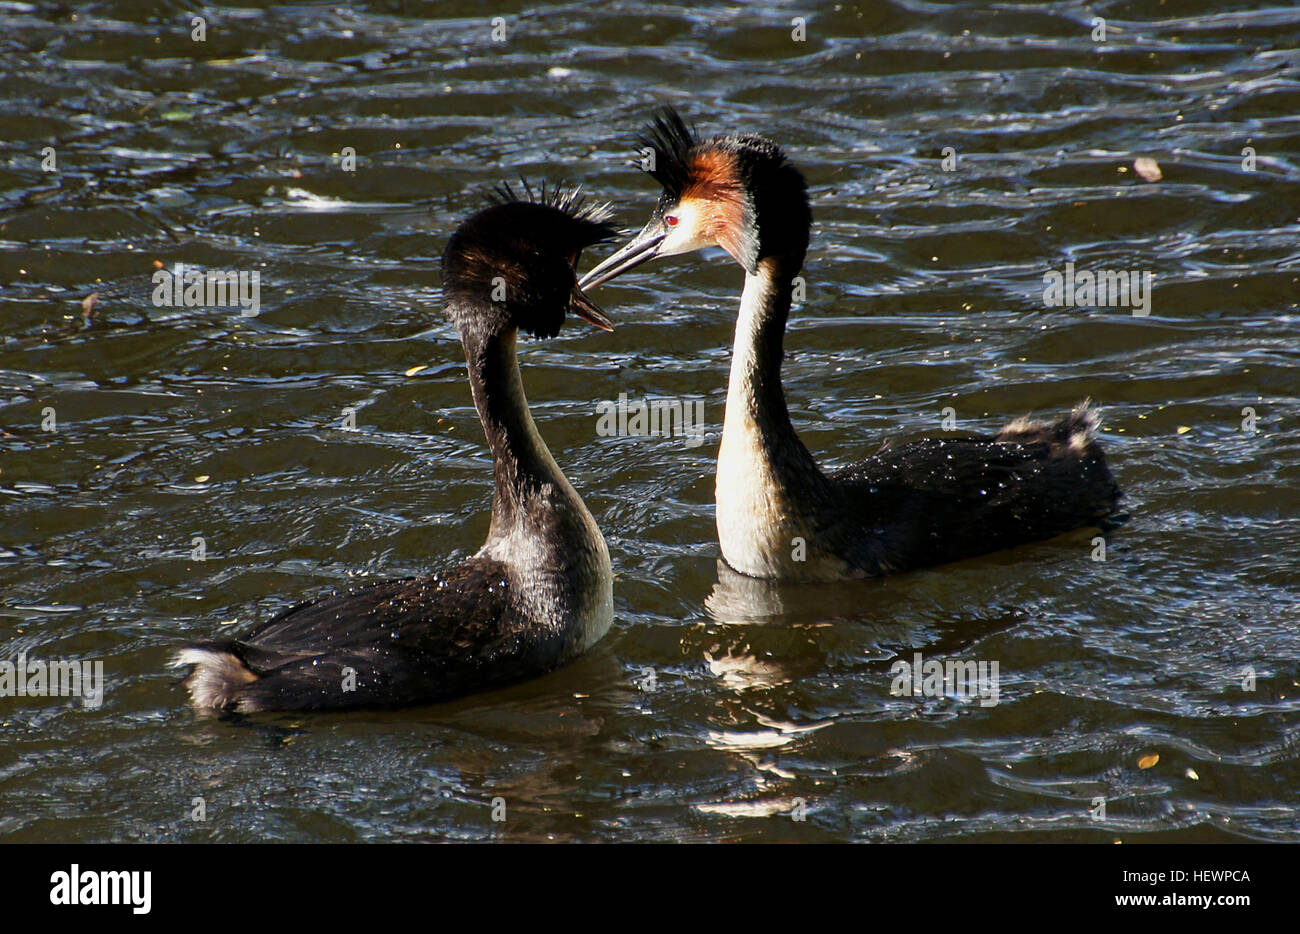 The Australasian crested grebe is majestic and distinctive diving bird that is usually seen on the southern lakes of New Zealand where it breeds. It has a slender neck, sharp black bill and head with a distinctive black double crest and bright chestnut and black cheek frills, which it uses in its complex and bizarre mating displays. It is unusual for the way it carries its young on its back when swimming. The crested grebe belongs to an ancient order of diving water birds found on every continent in the world. They are rarely seen on land except when they clamber onto their nests on the lake s Stock Photo